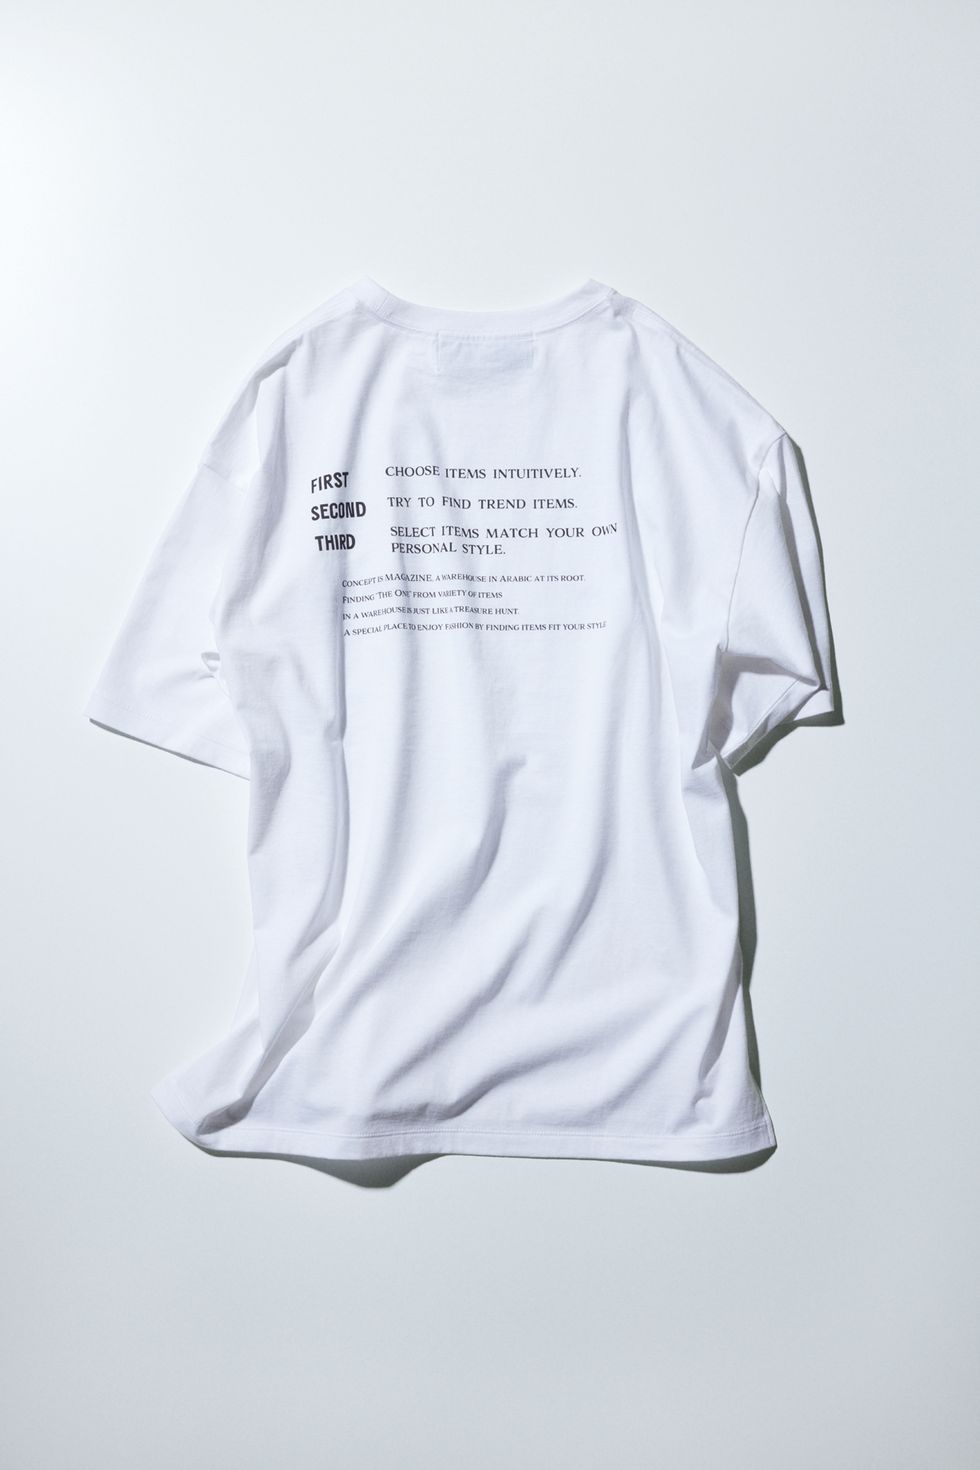 a white t shirt with a black and white text on it